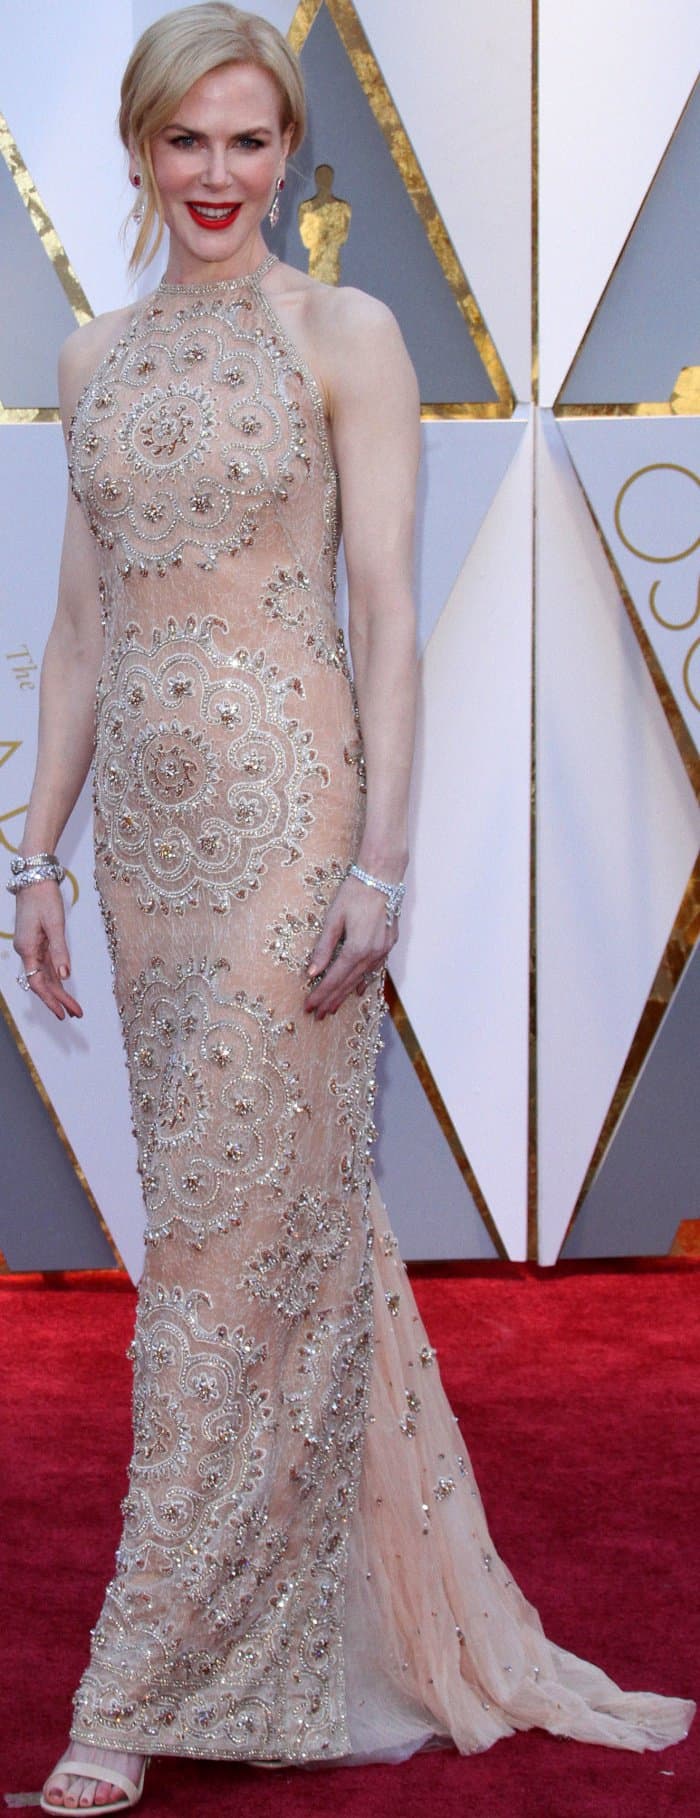 Nicole Kidman wearing a nude Armani Privé embellished column gown at the 2017 Oscars